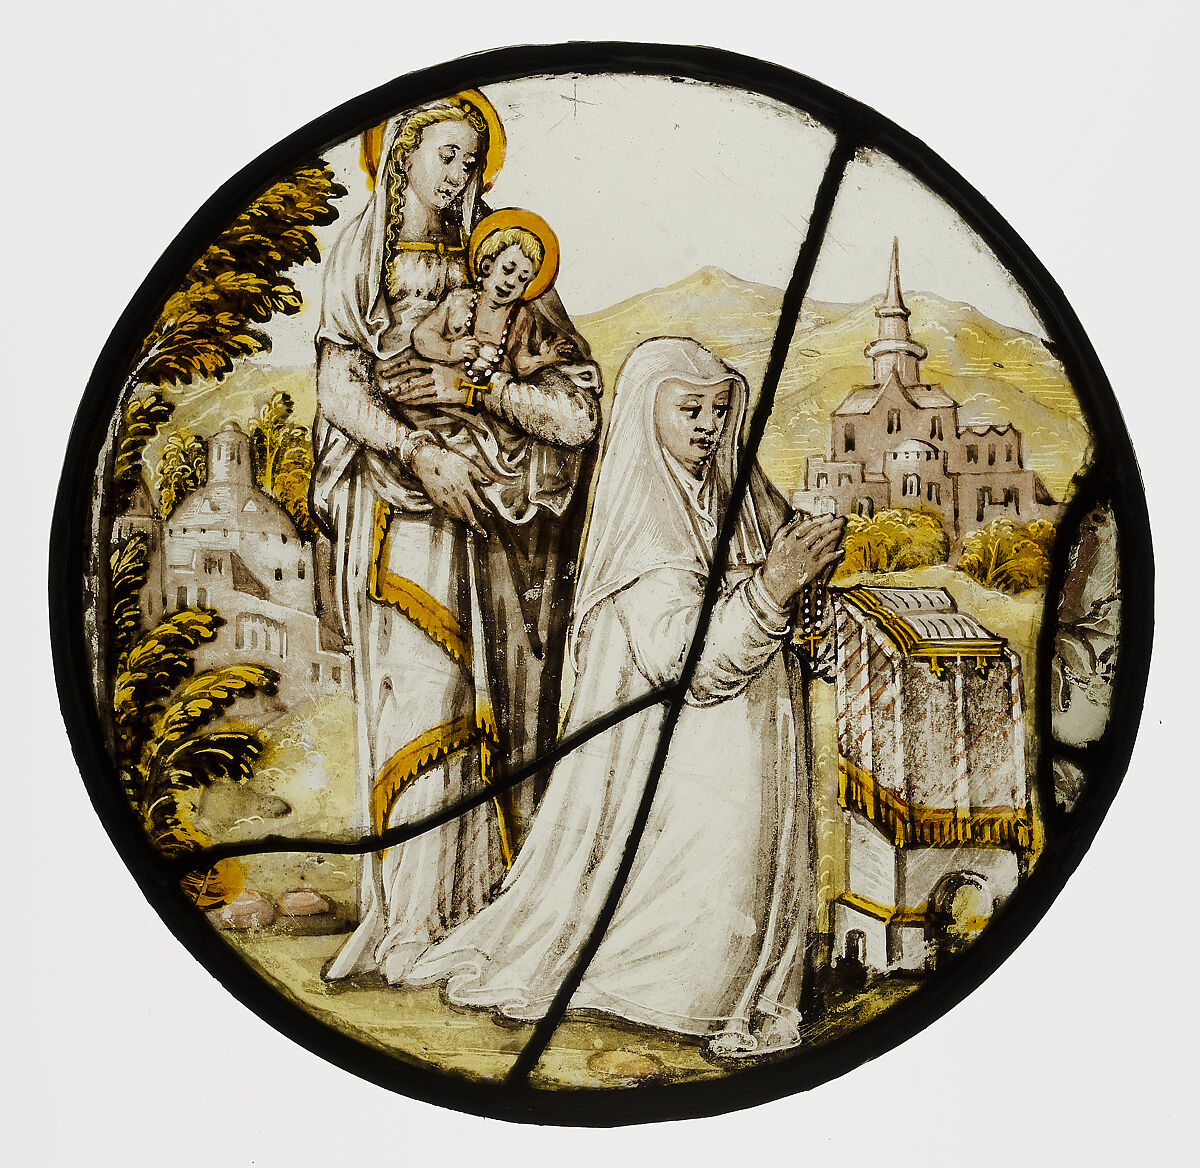 Roundel with Virgin and Child and a Carmelite Donatrix, Colorless glass, silver stain, vitreous paint, South Netherlandish 